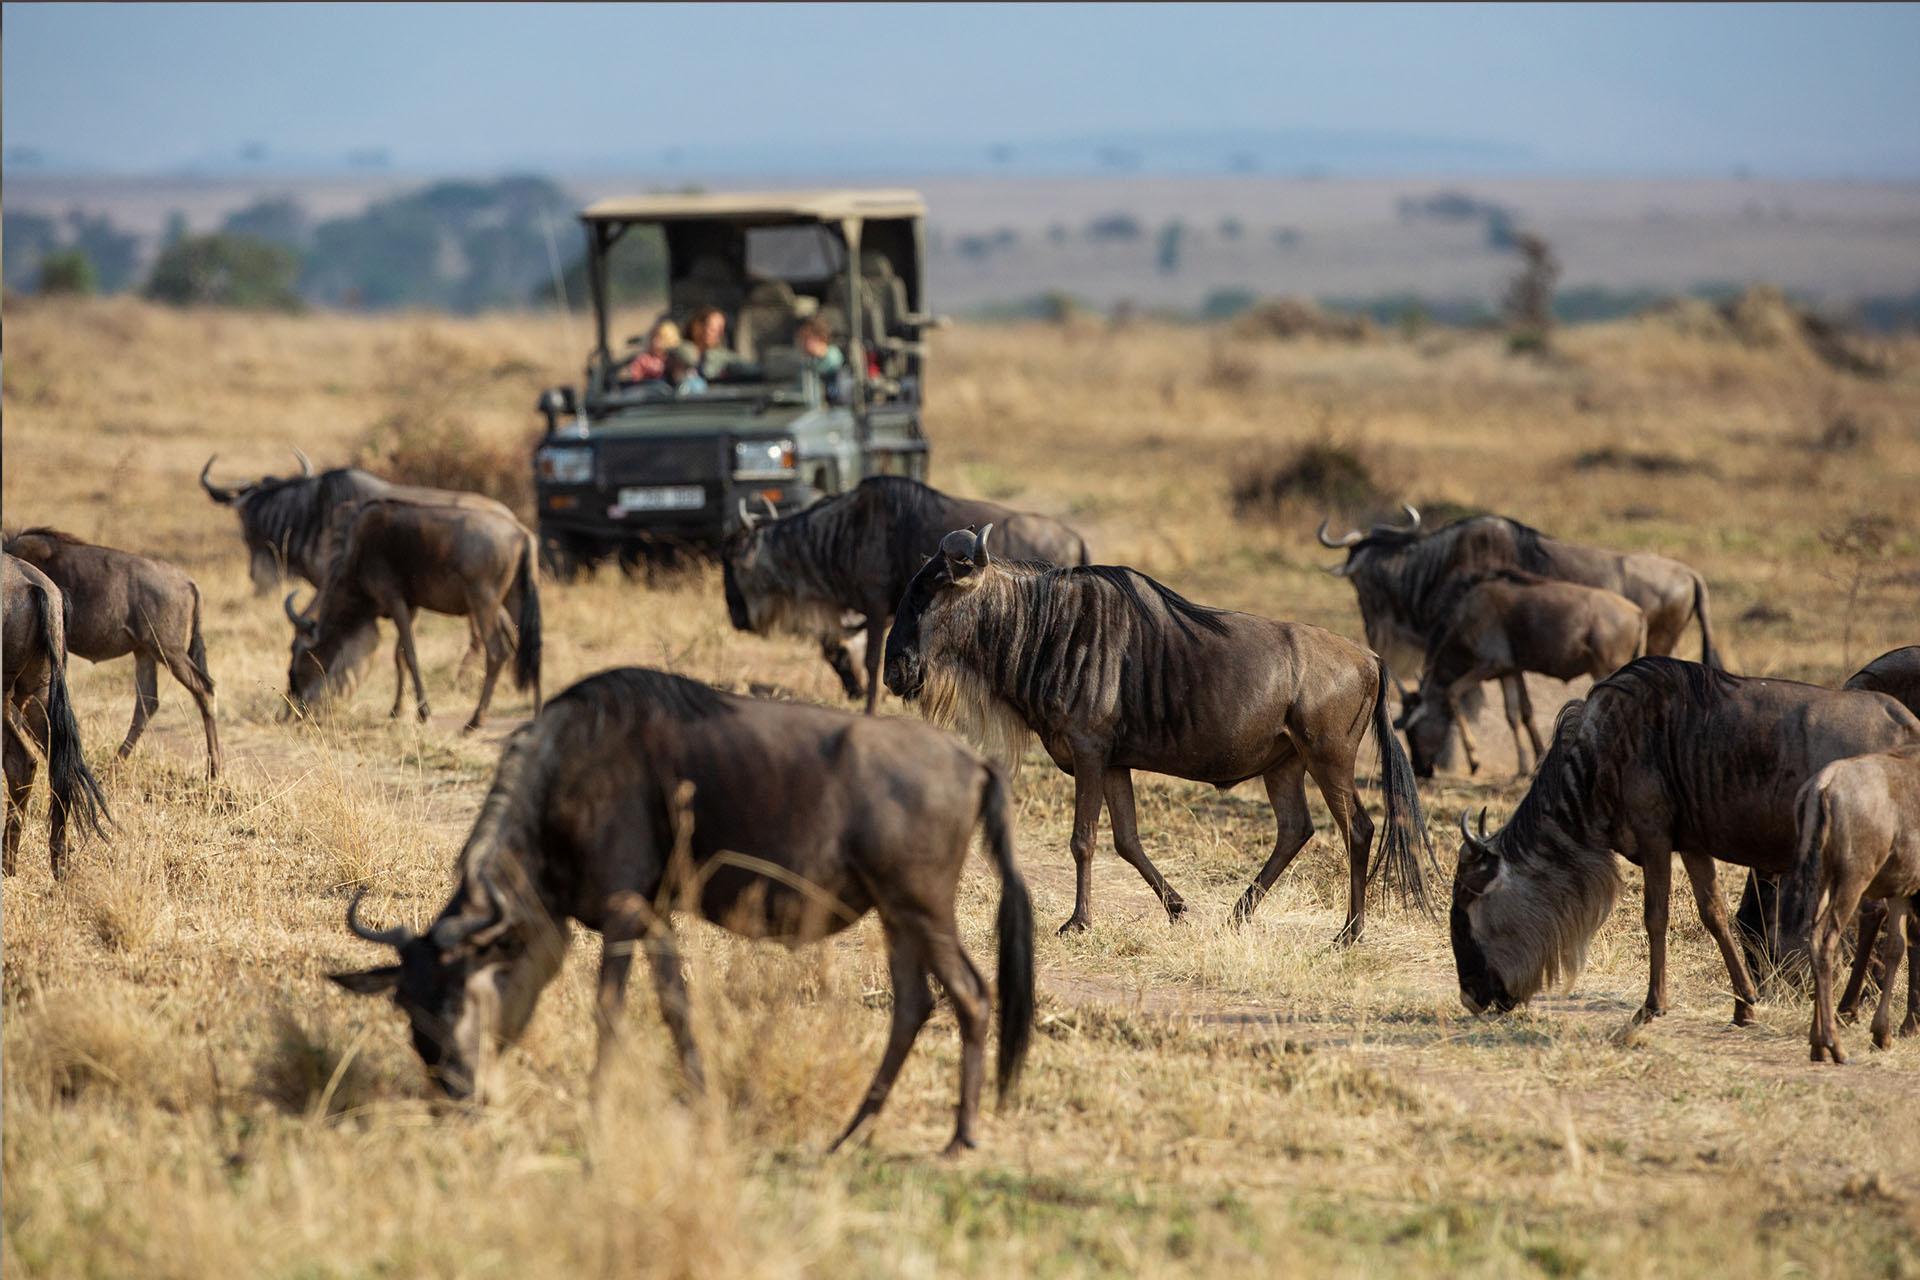 Magnificent migration crossings have been witnessed by the first guests of the Siringit Migration Camp